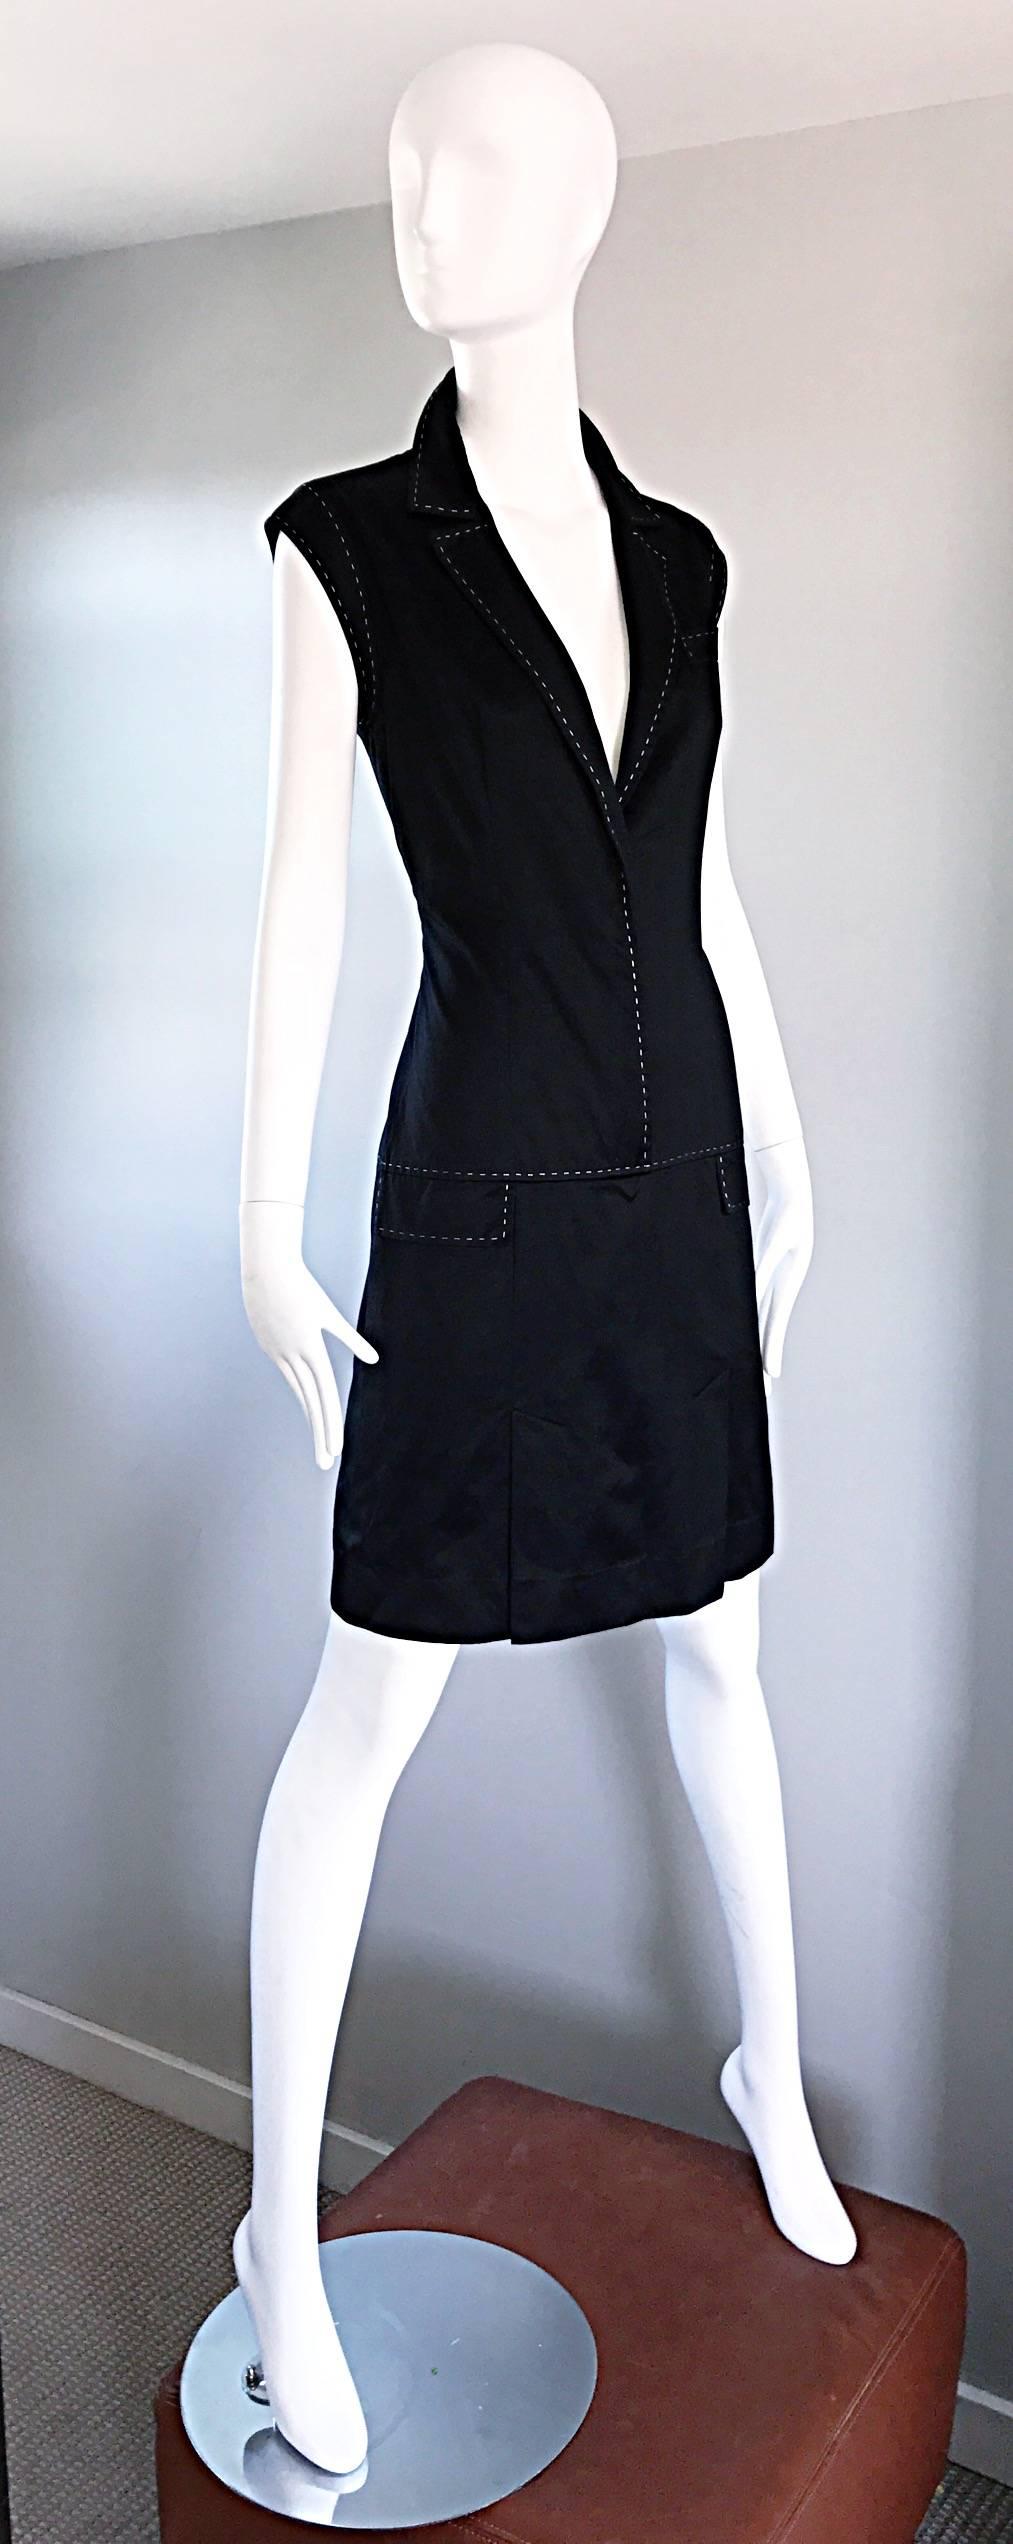 Women's Givenchy Couture By Alexander McQueen 1990s Black and White Shirt Dress Size 38